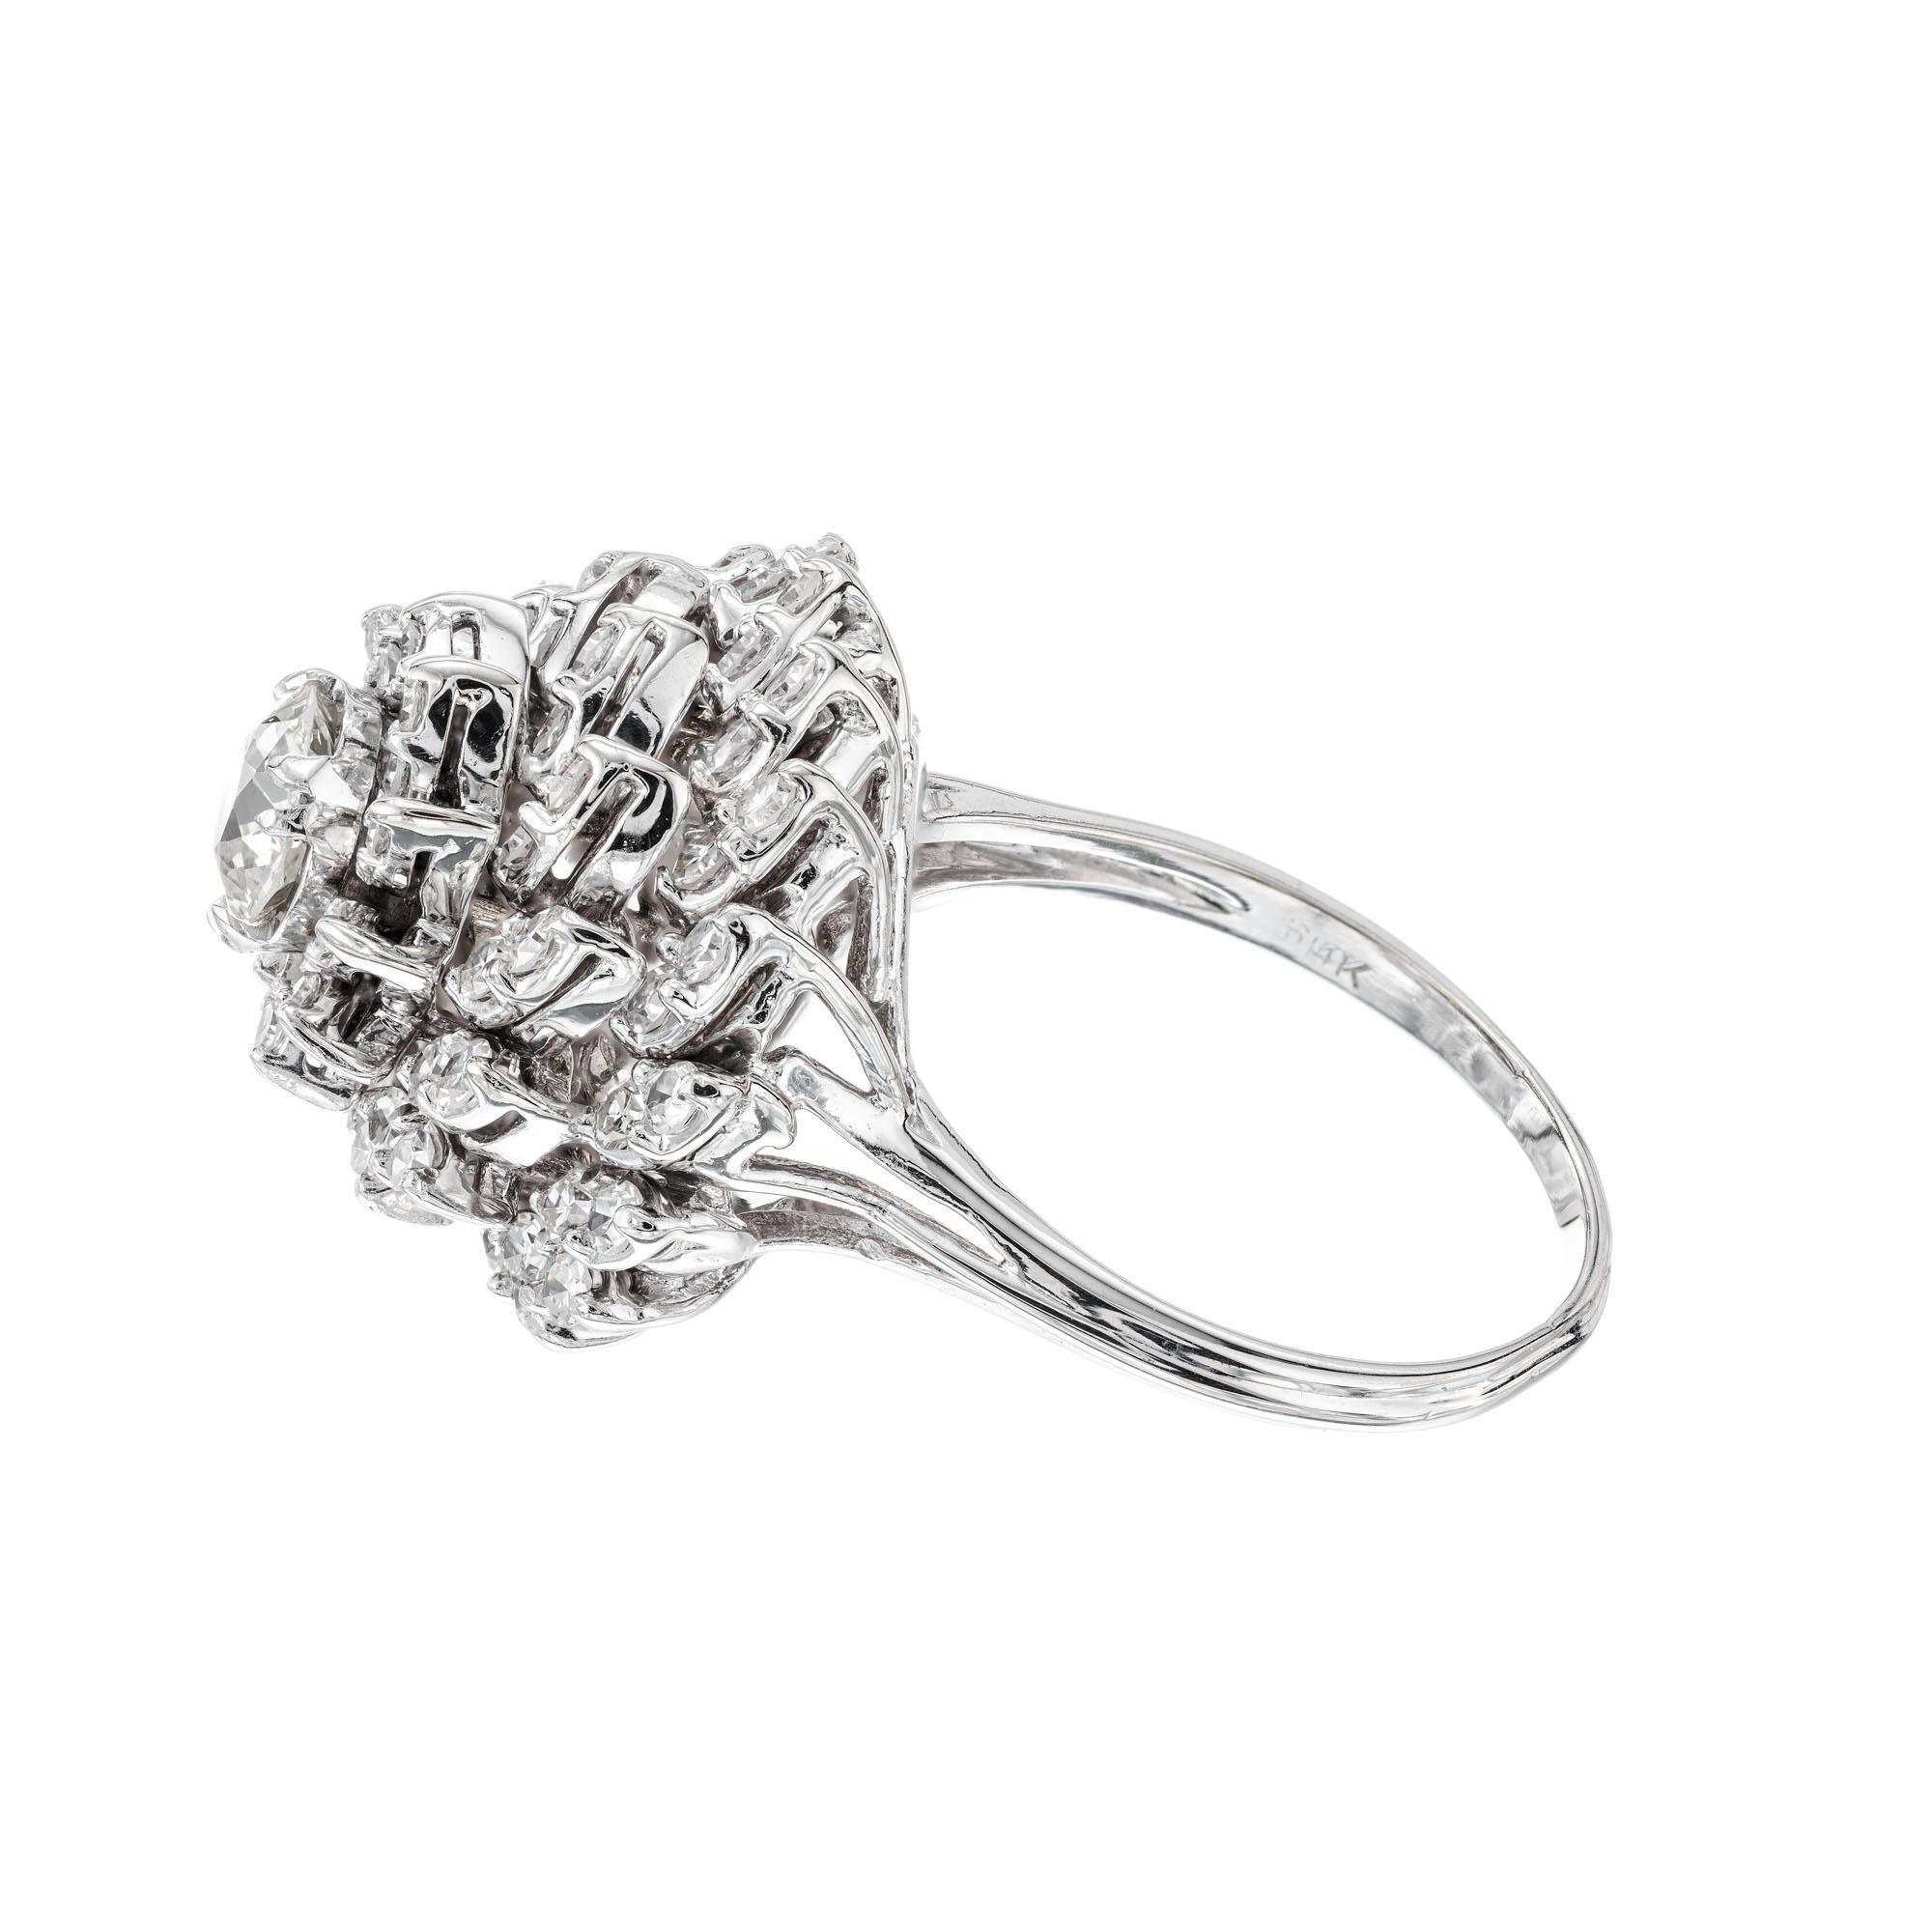 2.59 Carat Diamond Petal White Gold Cocktail Ring In Good Condition For Sale In Stamford, CT